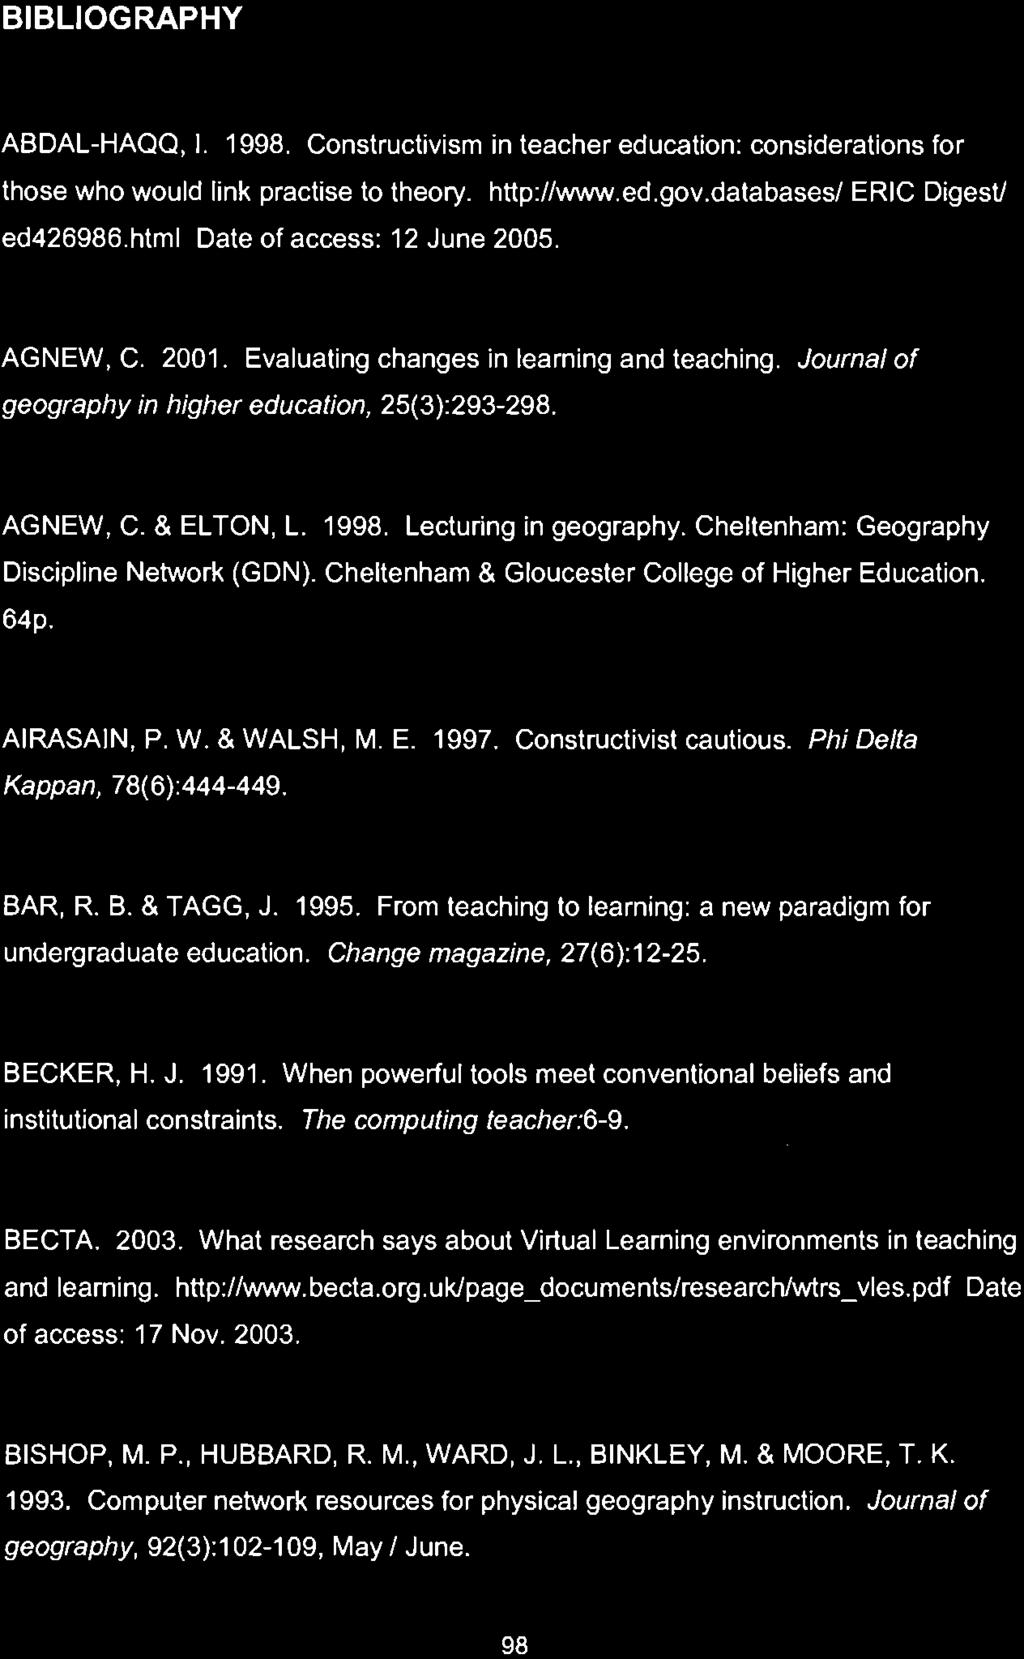 BIBLIOGRAPHY ASOAL-HAQQ, 1. 1998. Constructivism in teacher education: considerations for those who would link practise to theory. http://www.ed.gov.databased ERIC DigesV ed426986.